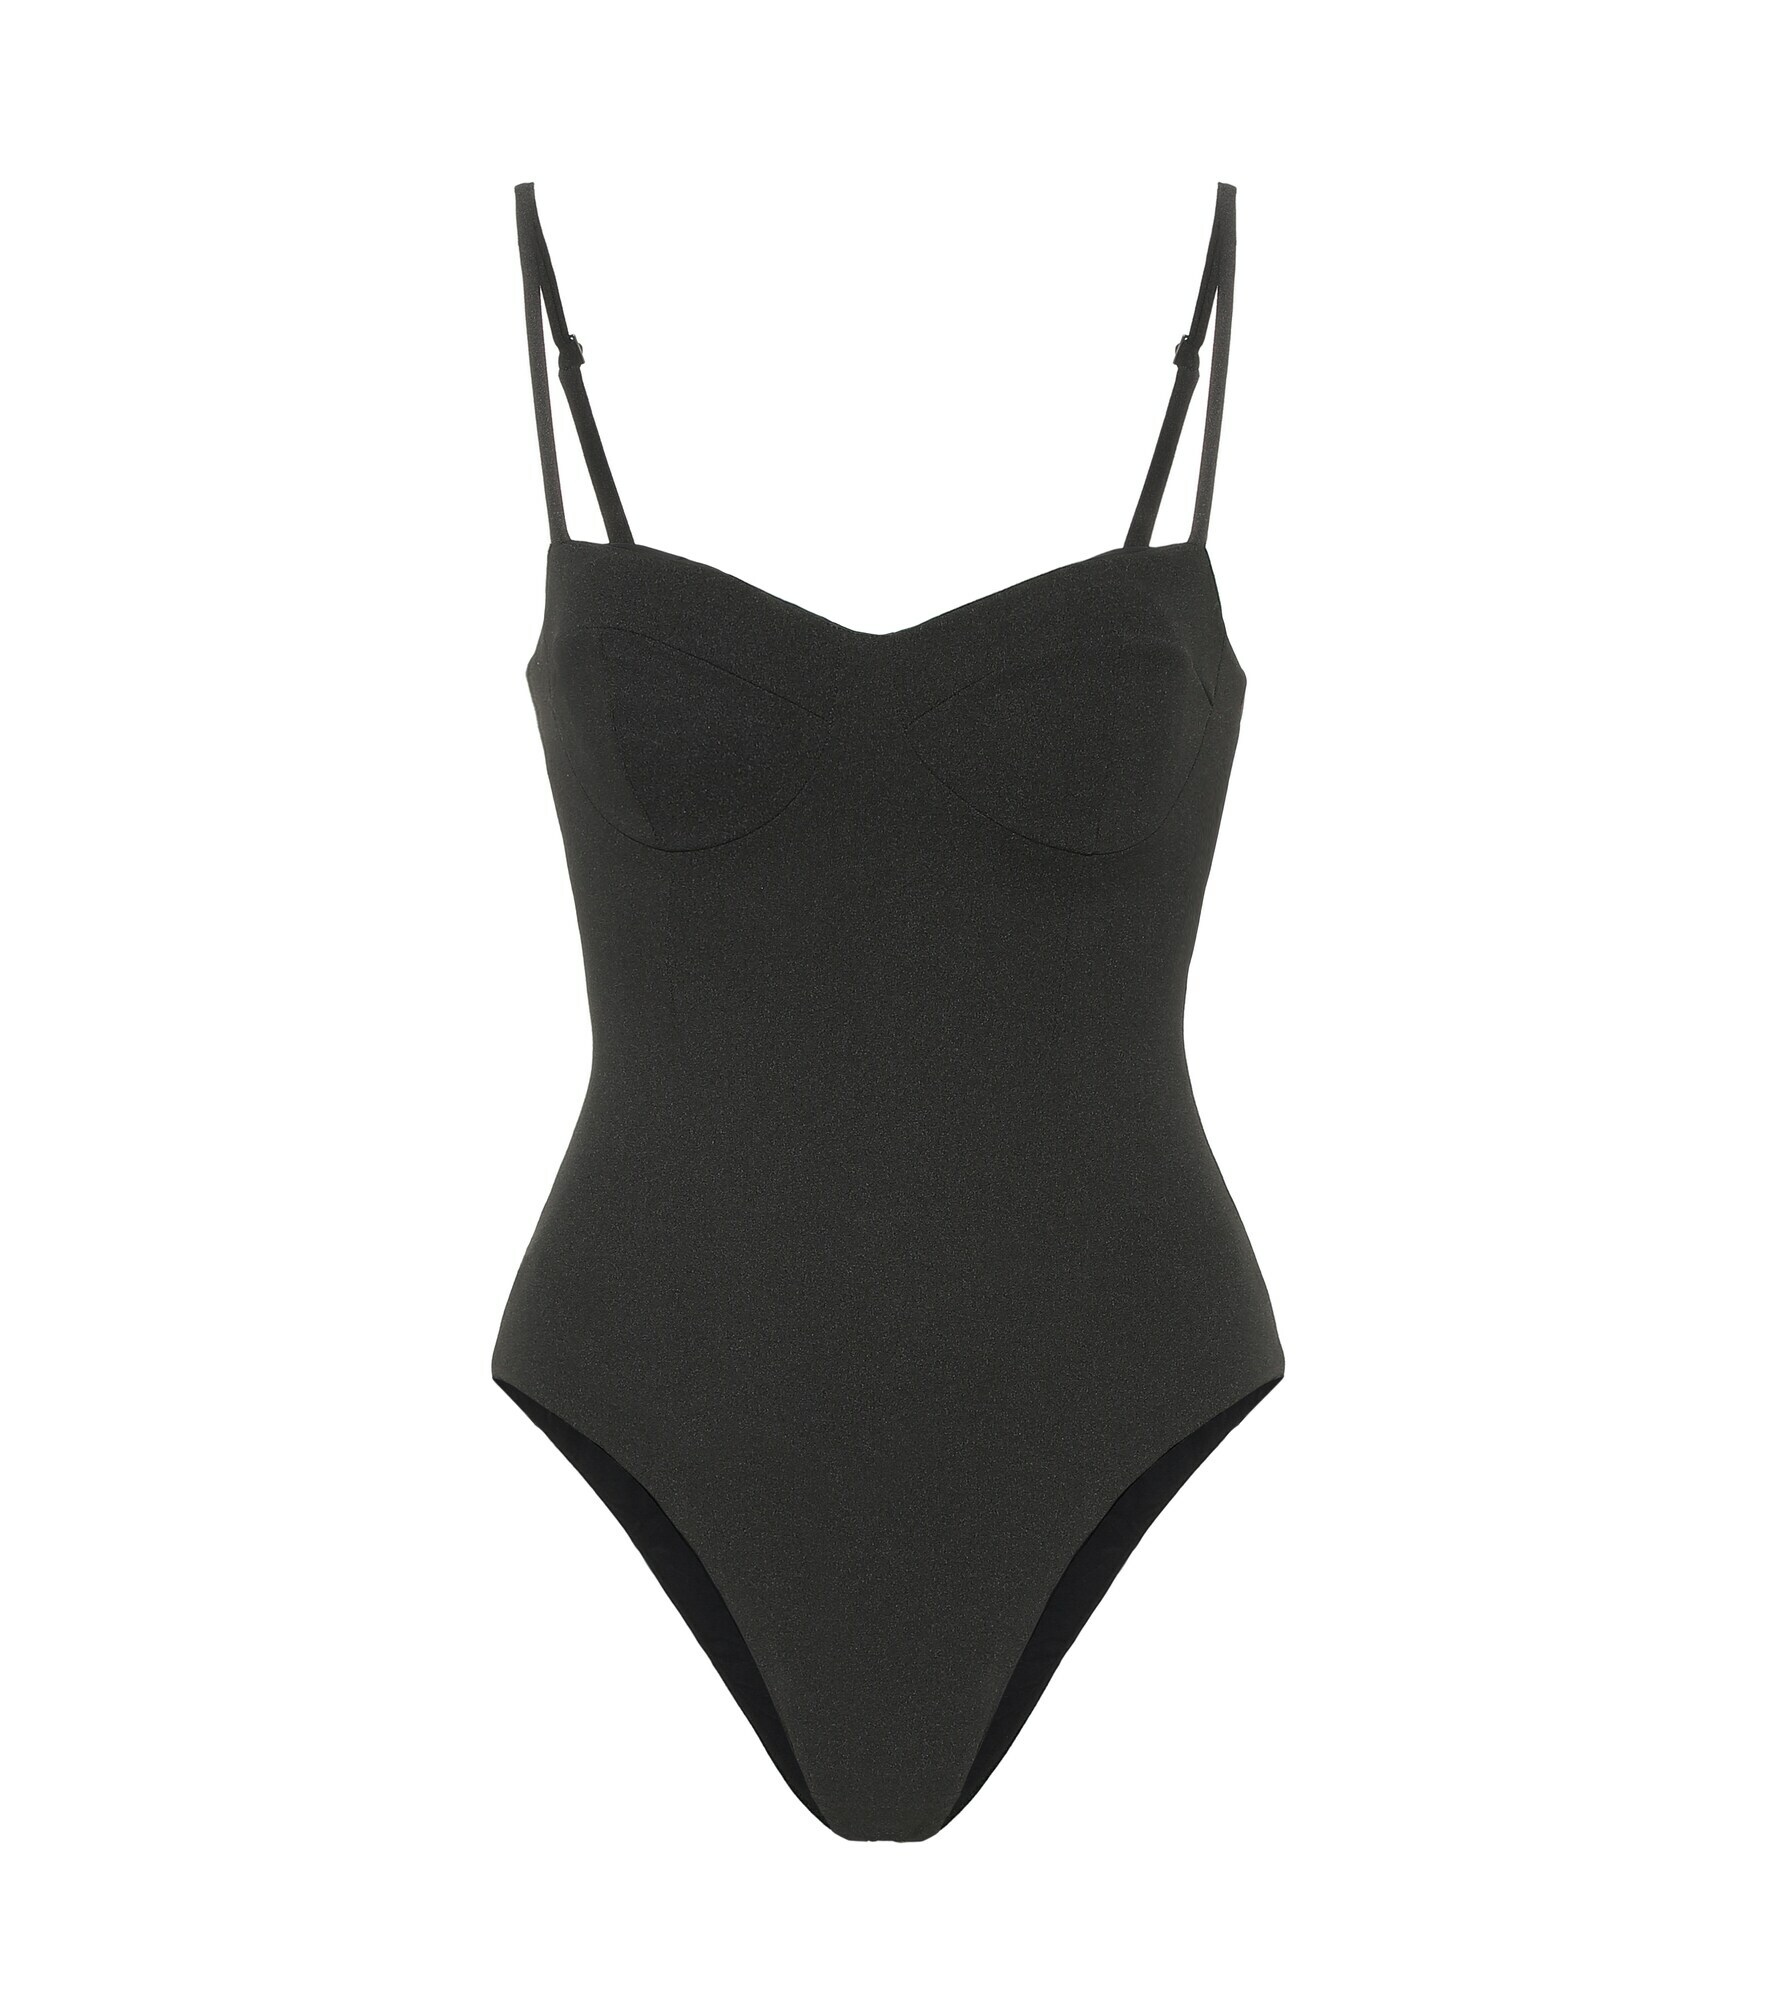 Haight - Beca one-piece swimsuit Haight